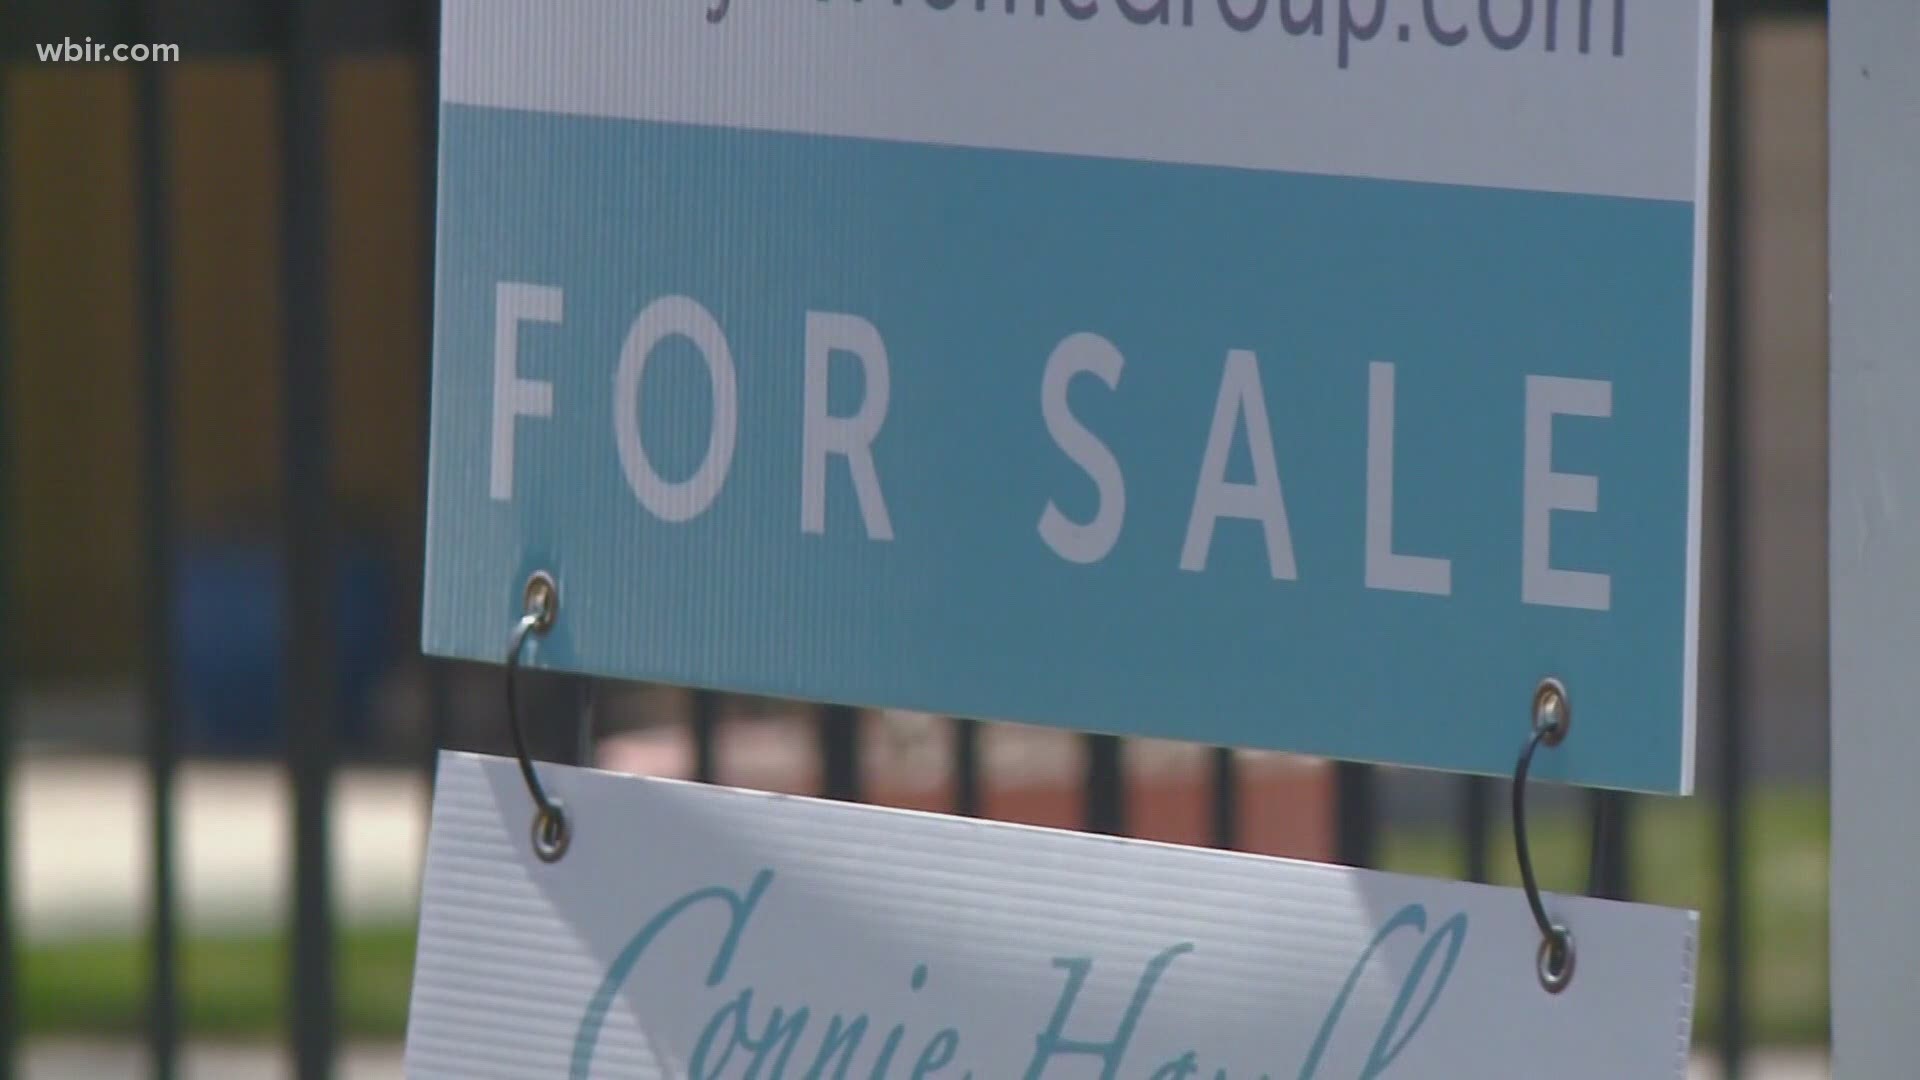 If you're looking to buy a home right now, the good news is there are more than 5,000 realtors to choose from in Knox County.